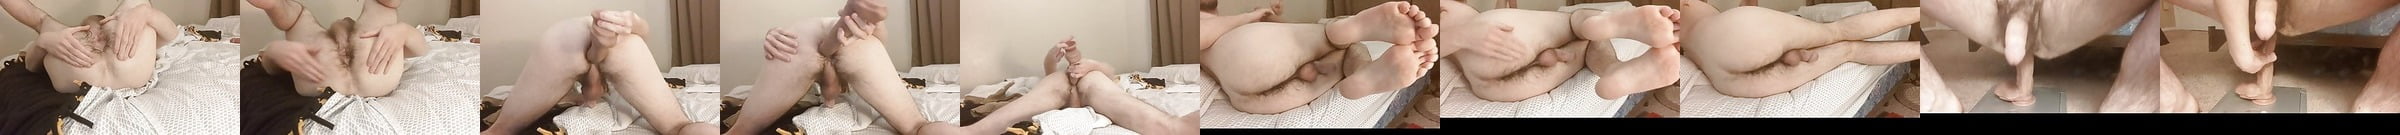 Featured Hairy Gay Porn Videos 12 Xhamster